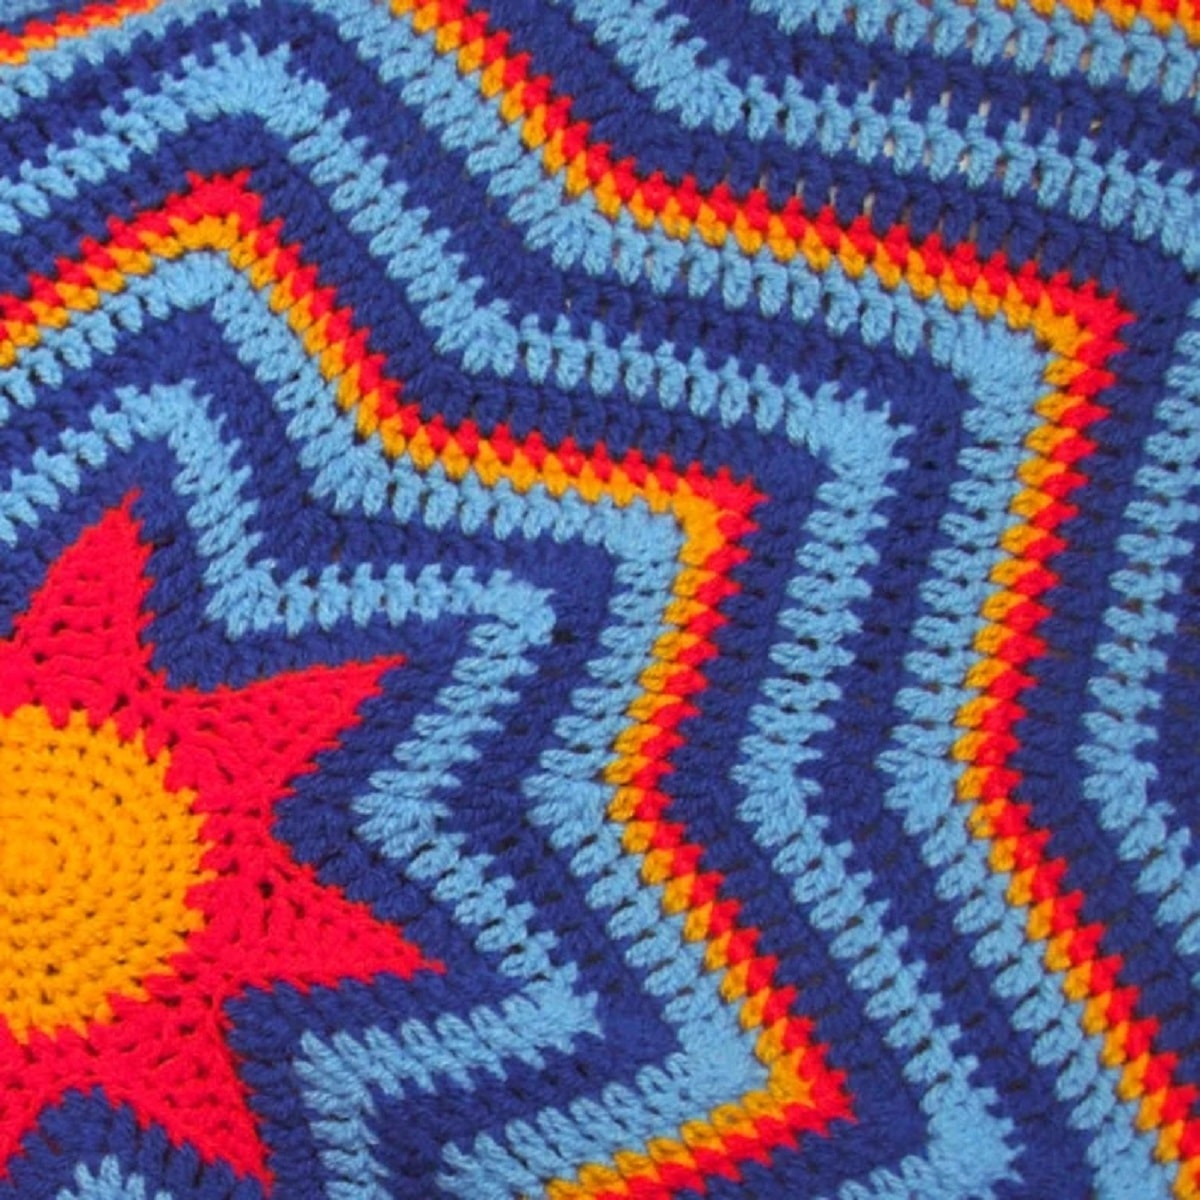 Star shaped crochet blanket with light blue, dark blue, orange, and red stars decreasing in size towards the center.